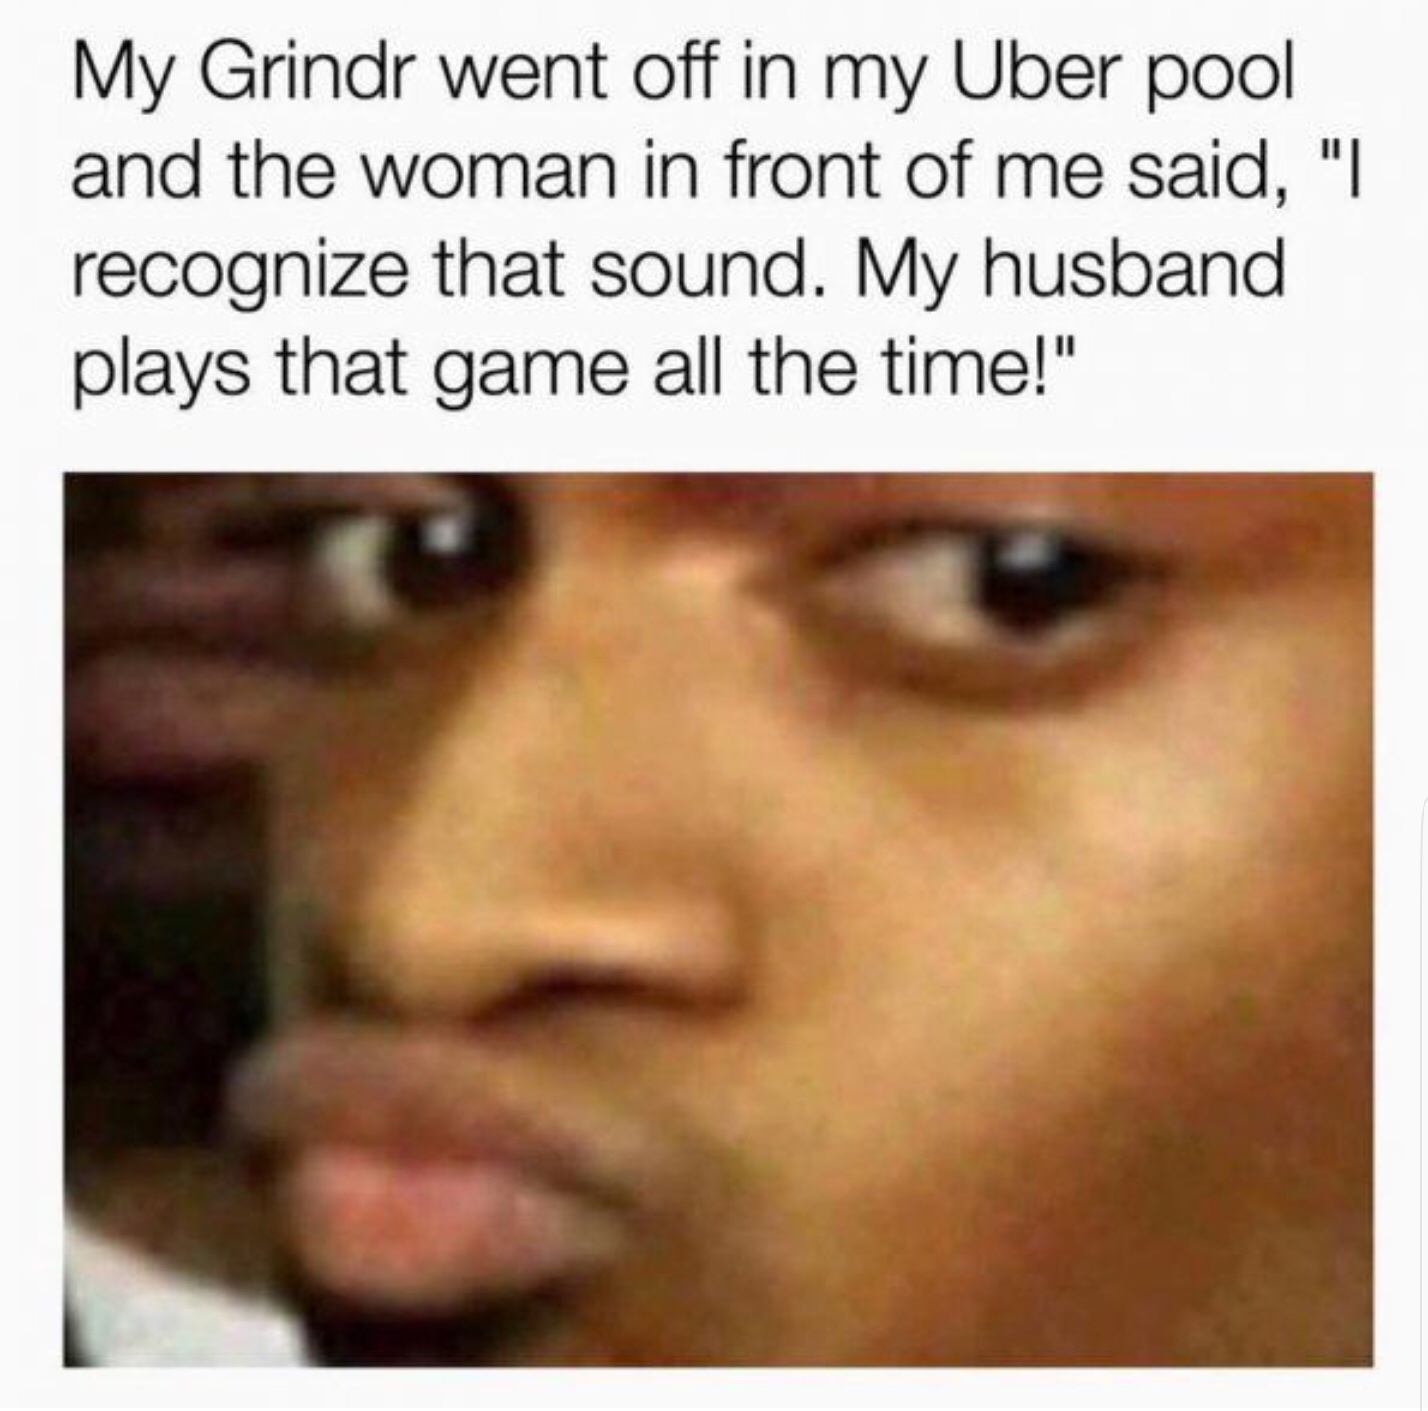 2019 memes - My Grindr went off in my Uber pool and the woman in front of me said, "I recognize that sound. My husband plays that game all the time!"